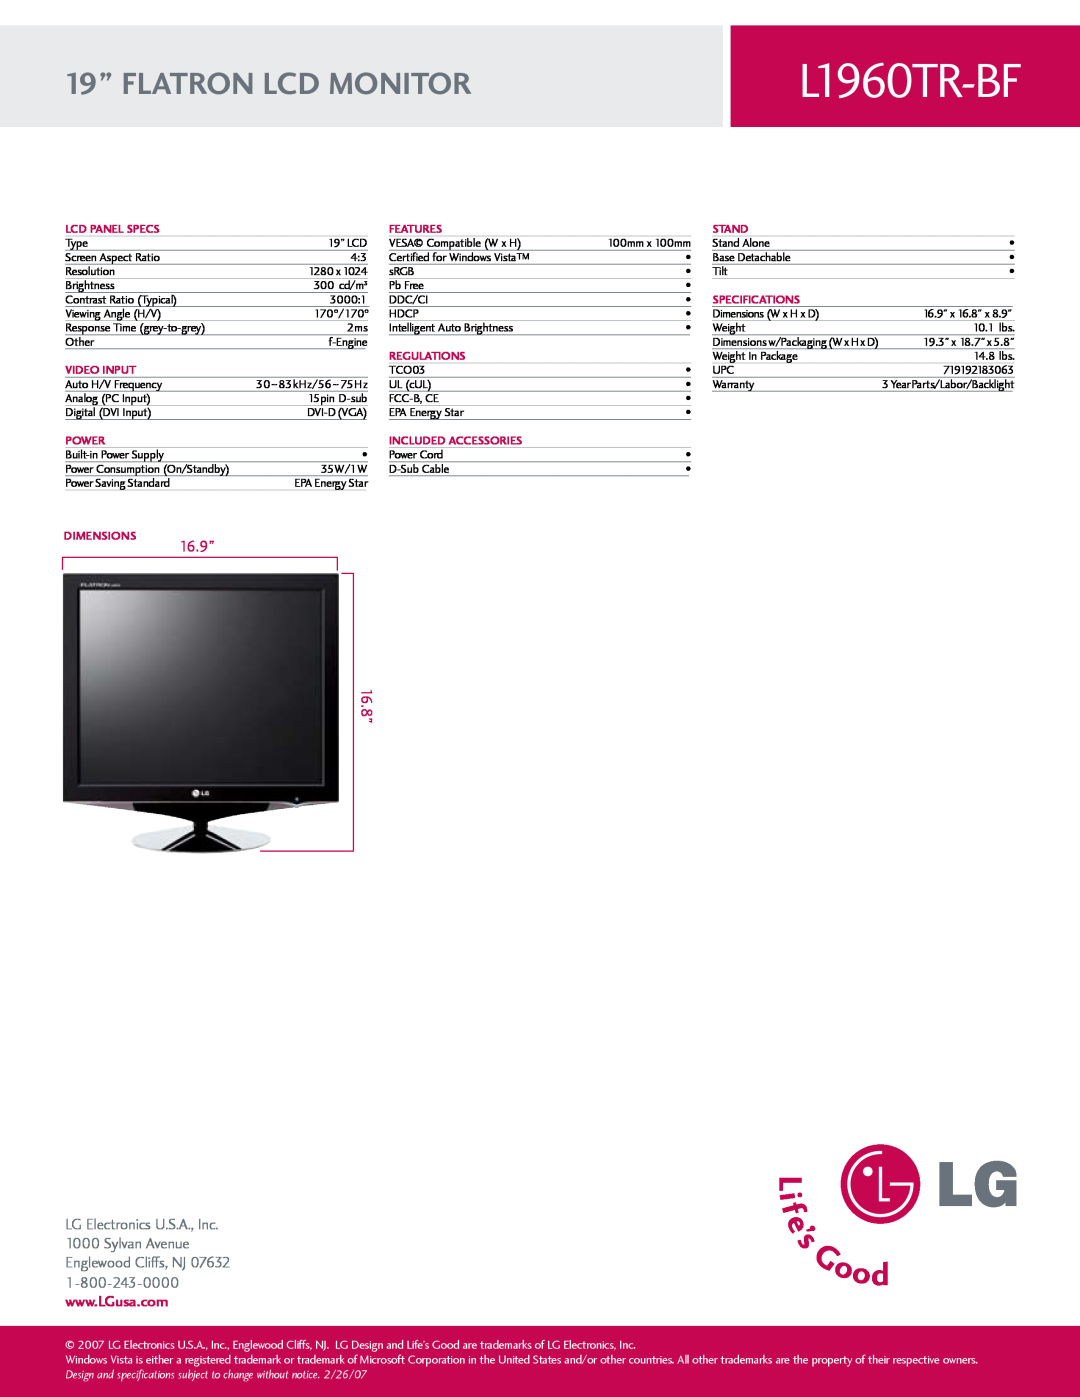 LG Electronics L1960TR-BF 19” FLATRON LCD MONITOR, 16.8”, 16.9”, Lcd Panel Specs, Features, Stand, Specifications, Power 